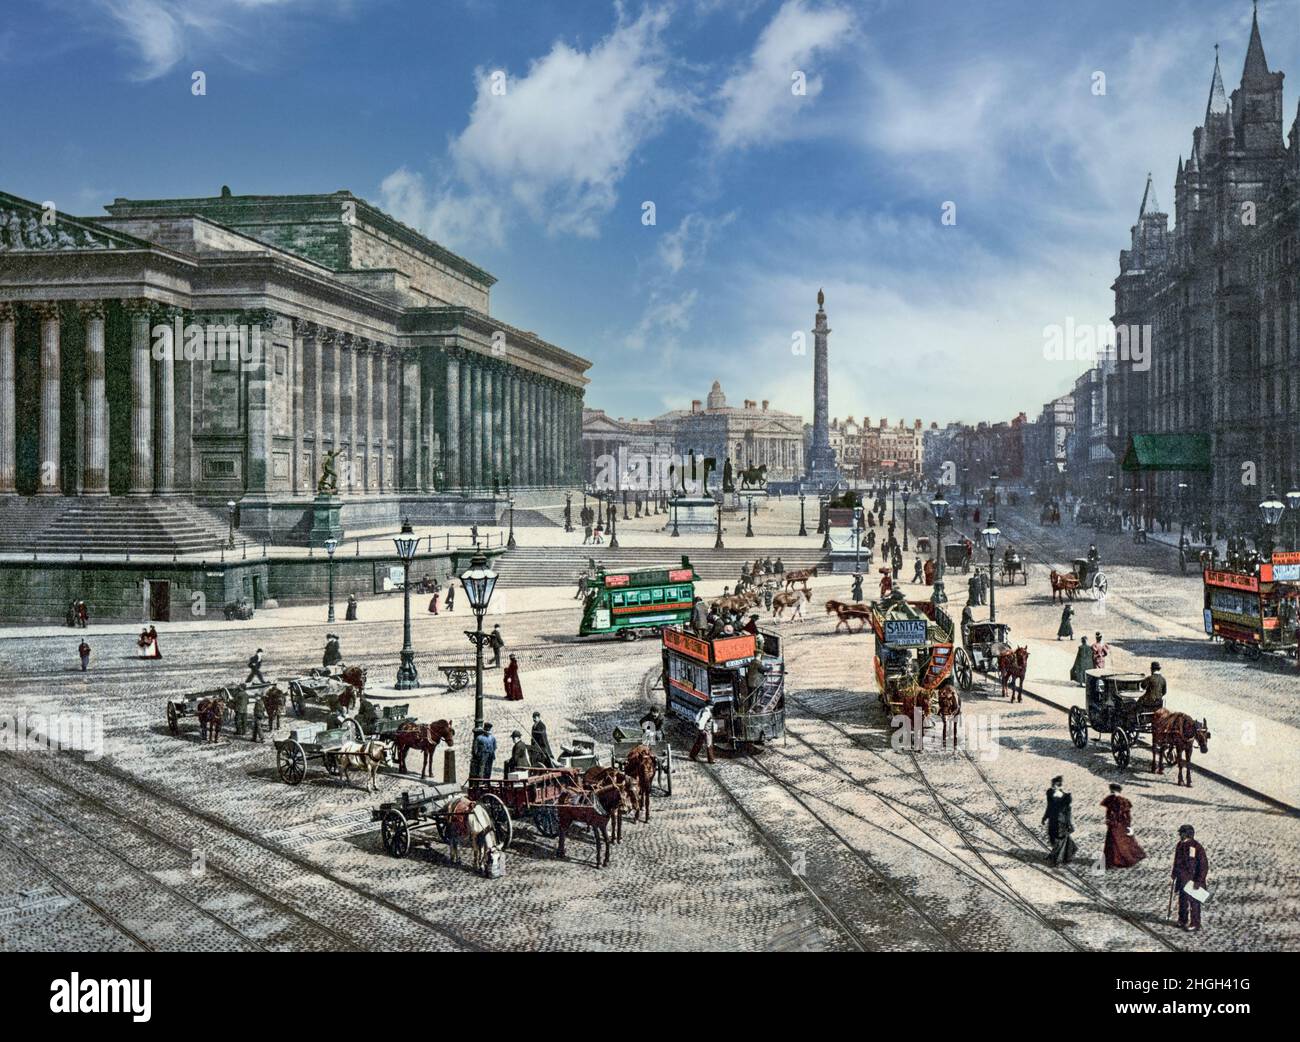 A late 19th Century illustration of Lime Street in Liverpool, England, named for lime kilns owned by William Harvey, a local businessman. To the left is St George's Hall, centre is Wellington's Column, a monument to the Duke of Wellington was built to mark one end of the street, at the corner with William Brown Street. The Renaissance Revival style building (right) was then the North Western Hotel. Stock Photo